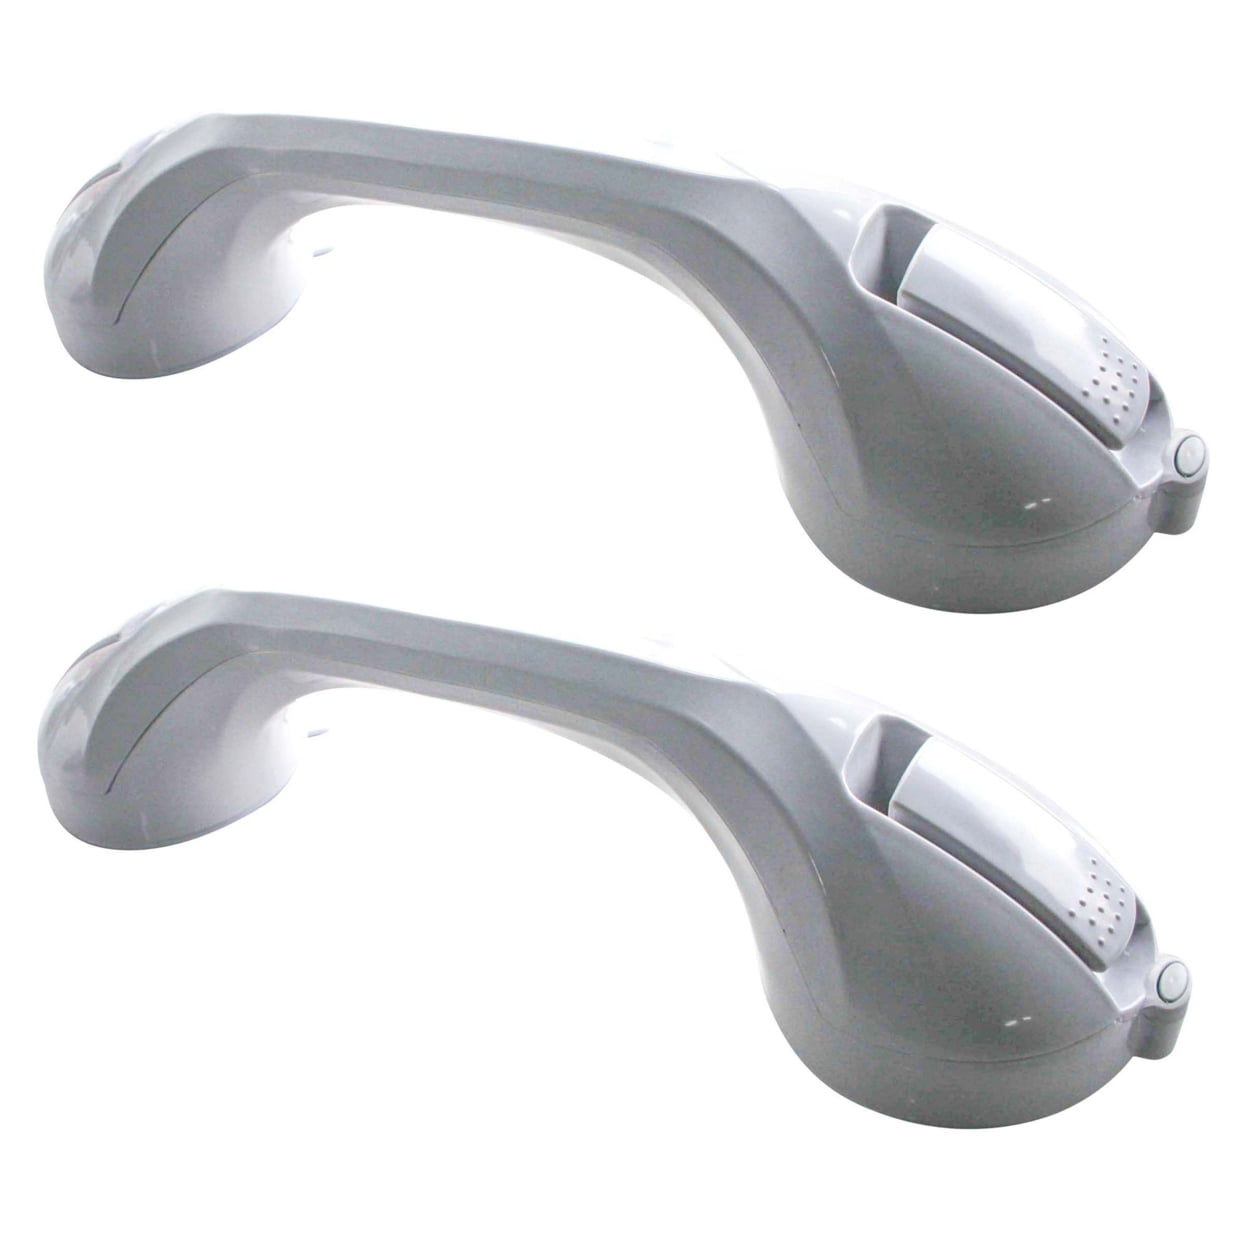 Picture of AmeriHome SGBSET16 16 in. Repositionable Suction Grab Bar Set, White - 2 Piece